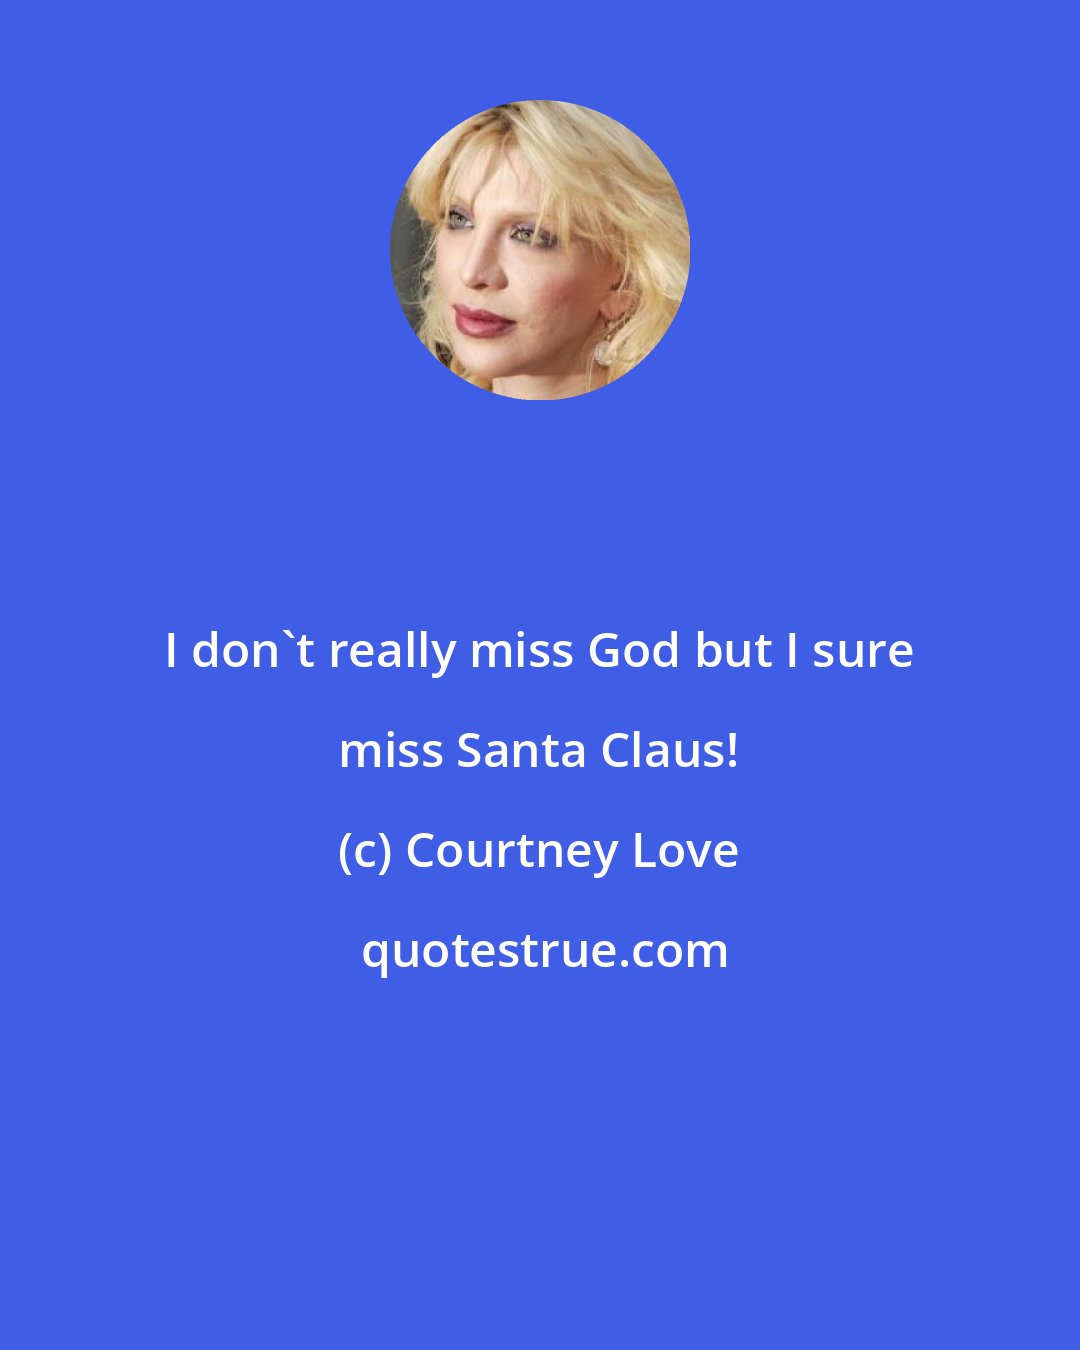 Courtney Love: I don't really miss God but I sure miss Santa Claus!